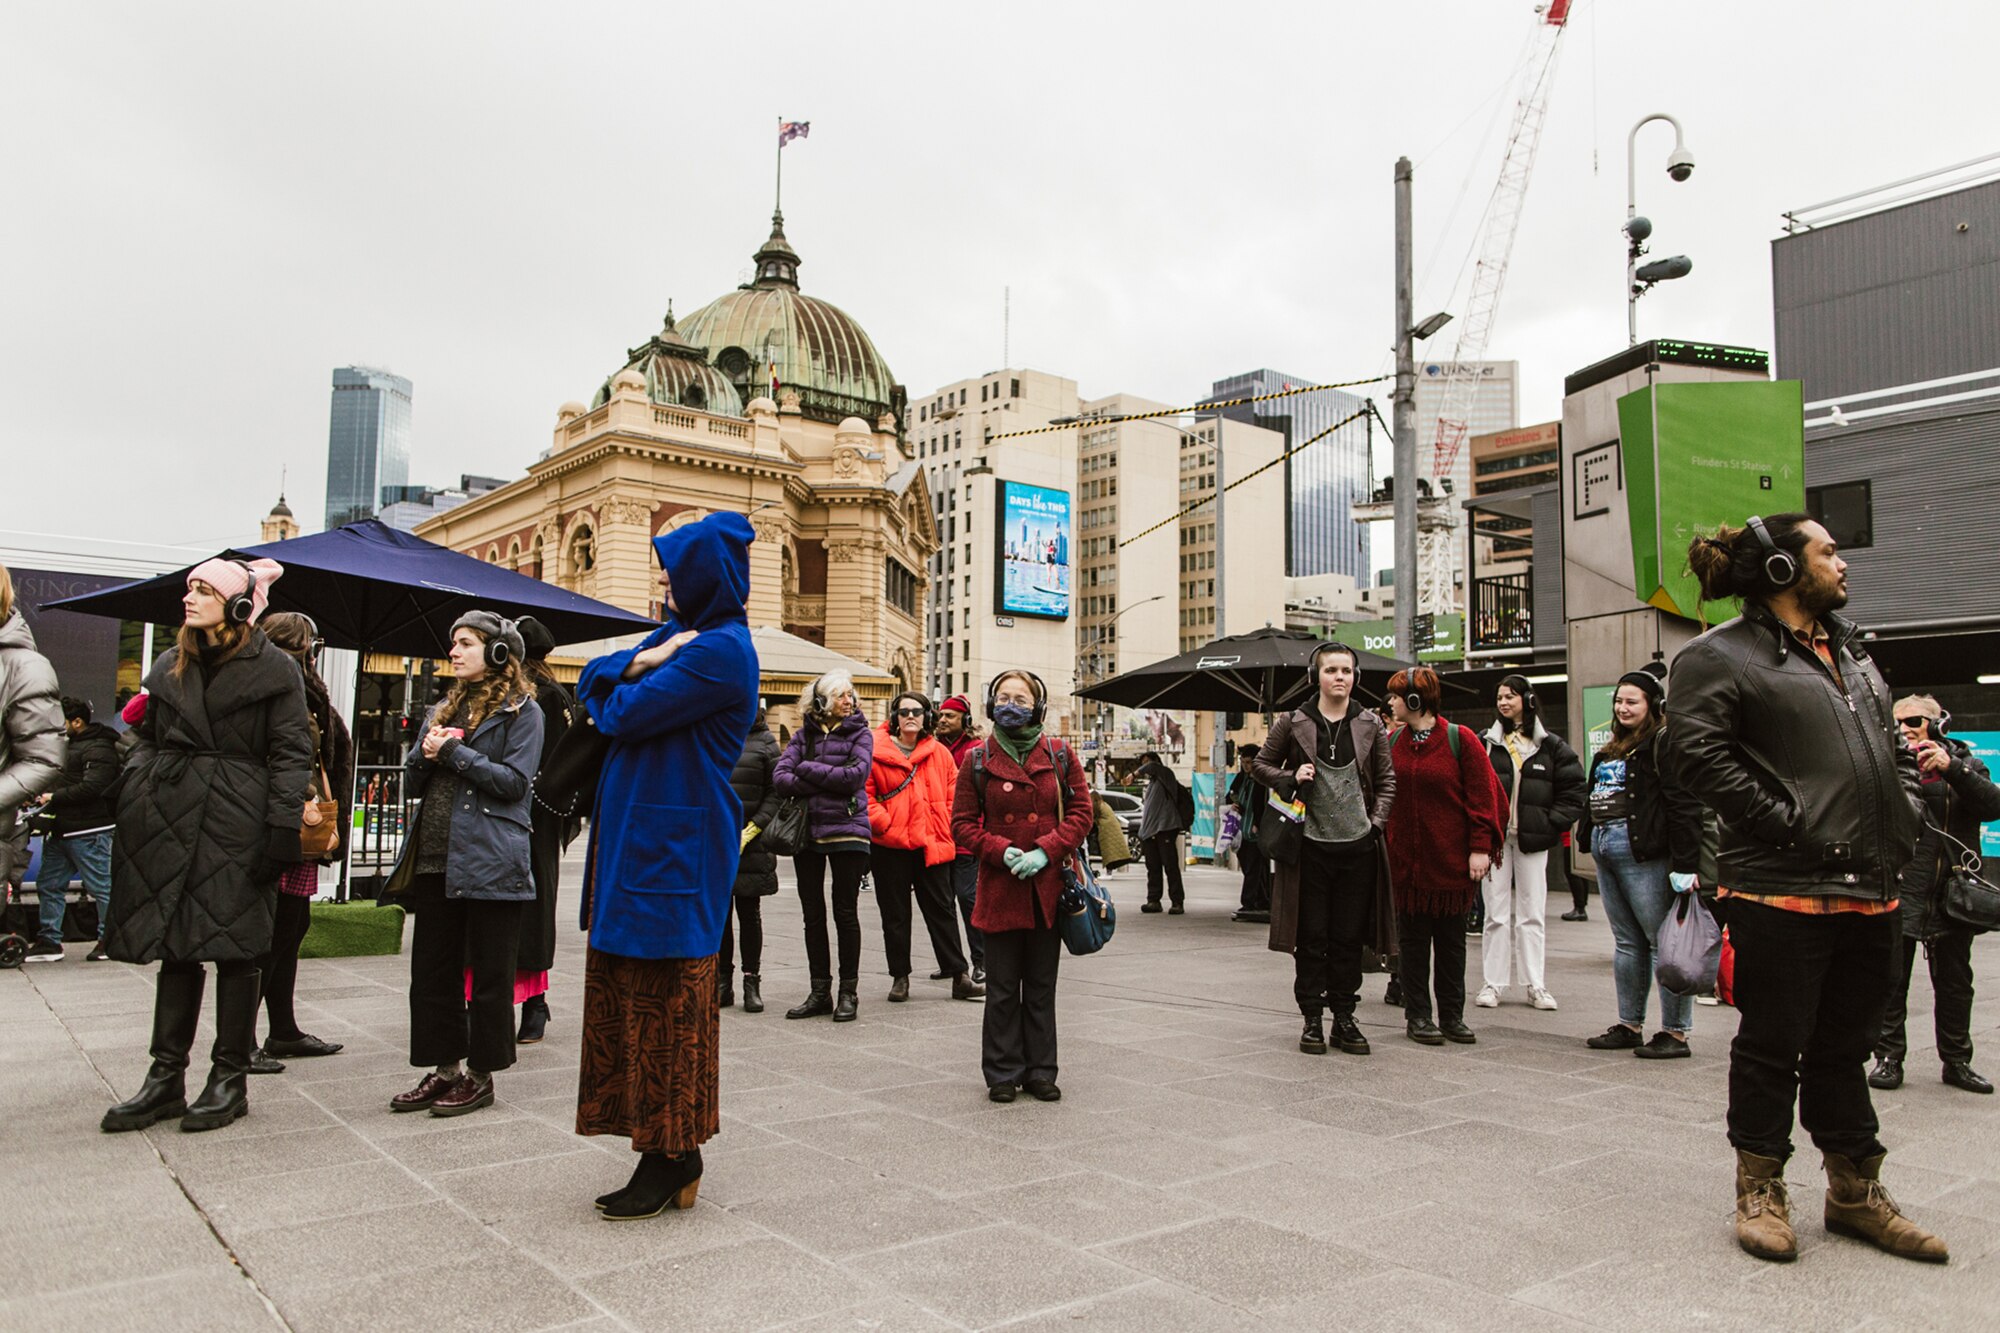 A crowd of people stand in Melbourne's Federation Square on a grey, overcast day. They are wearing headphones.